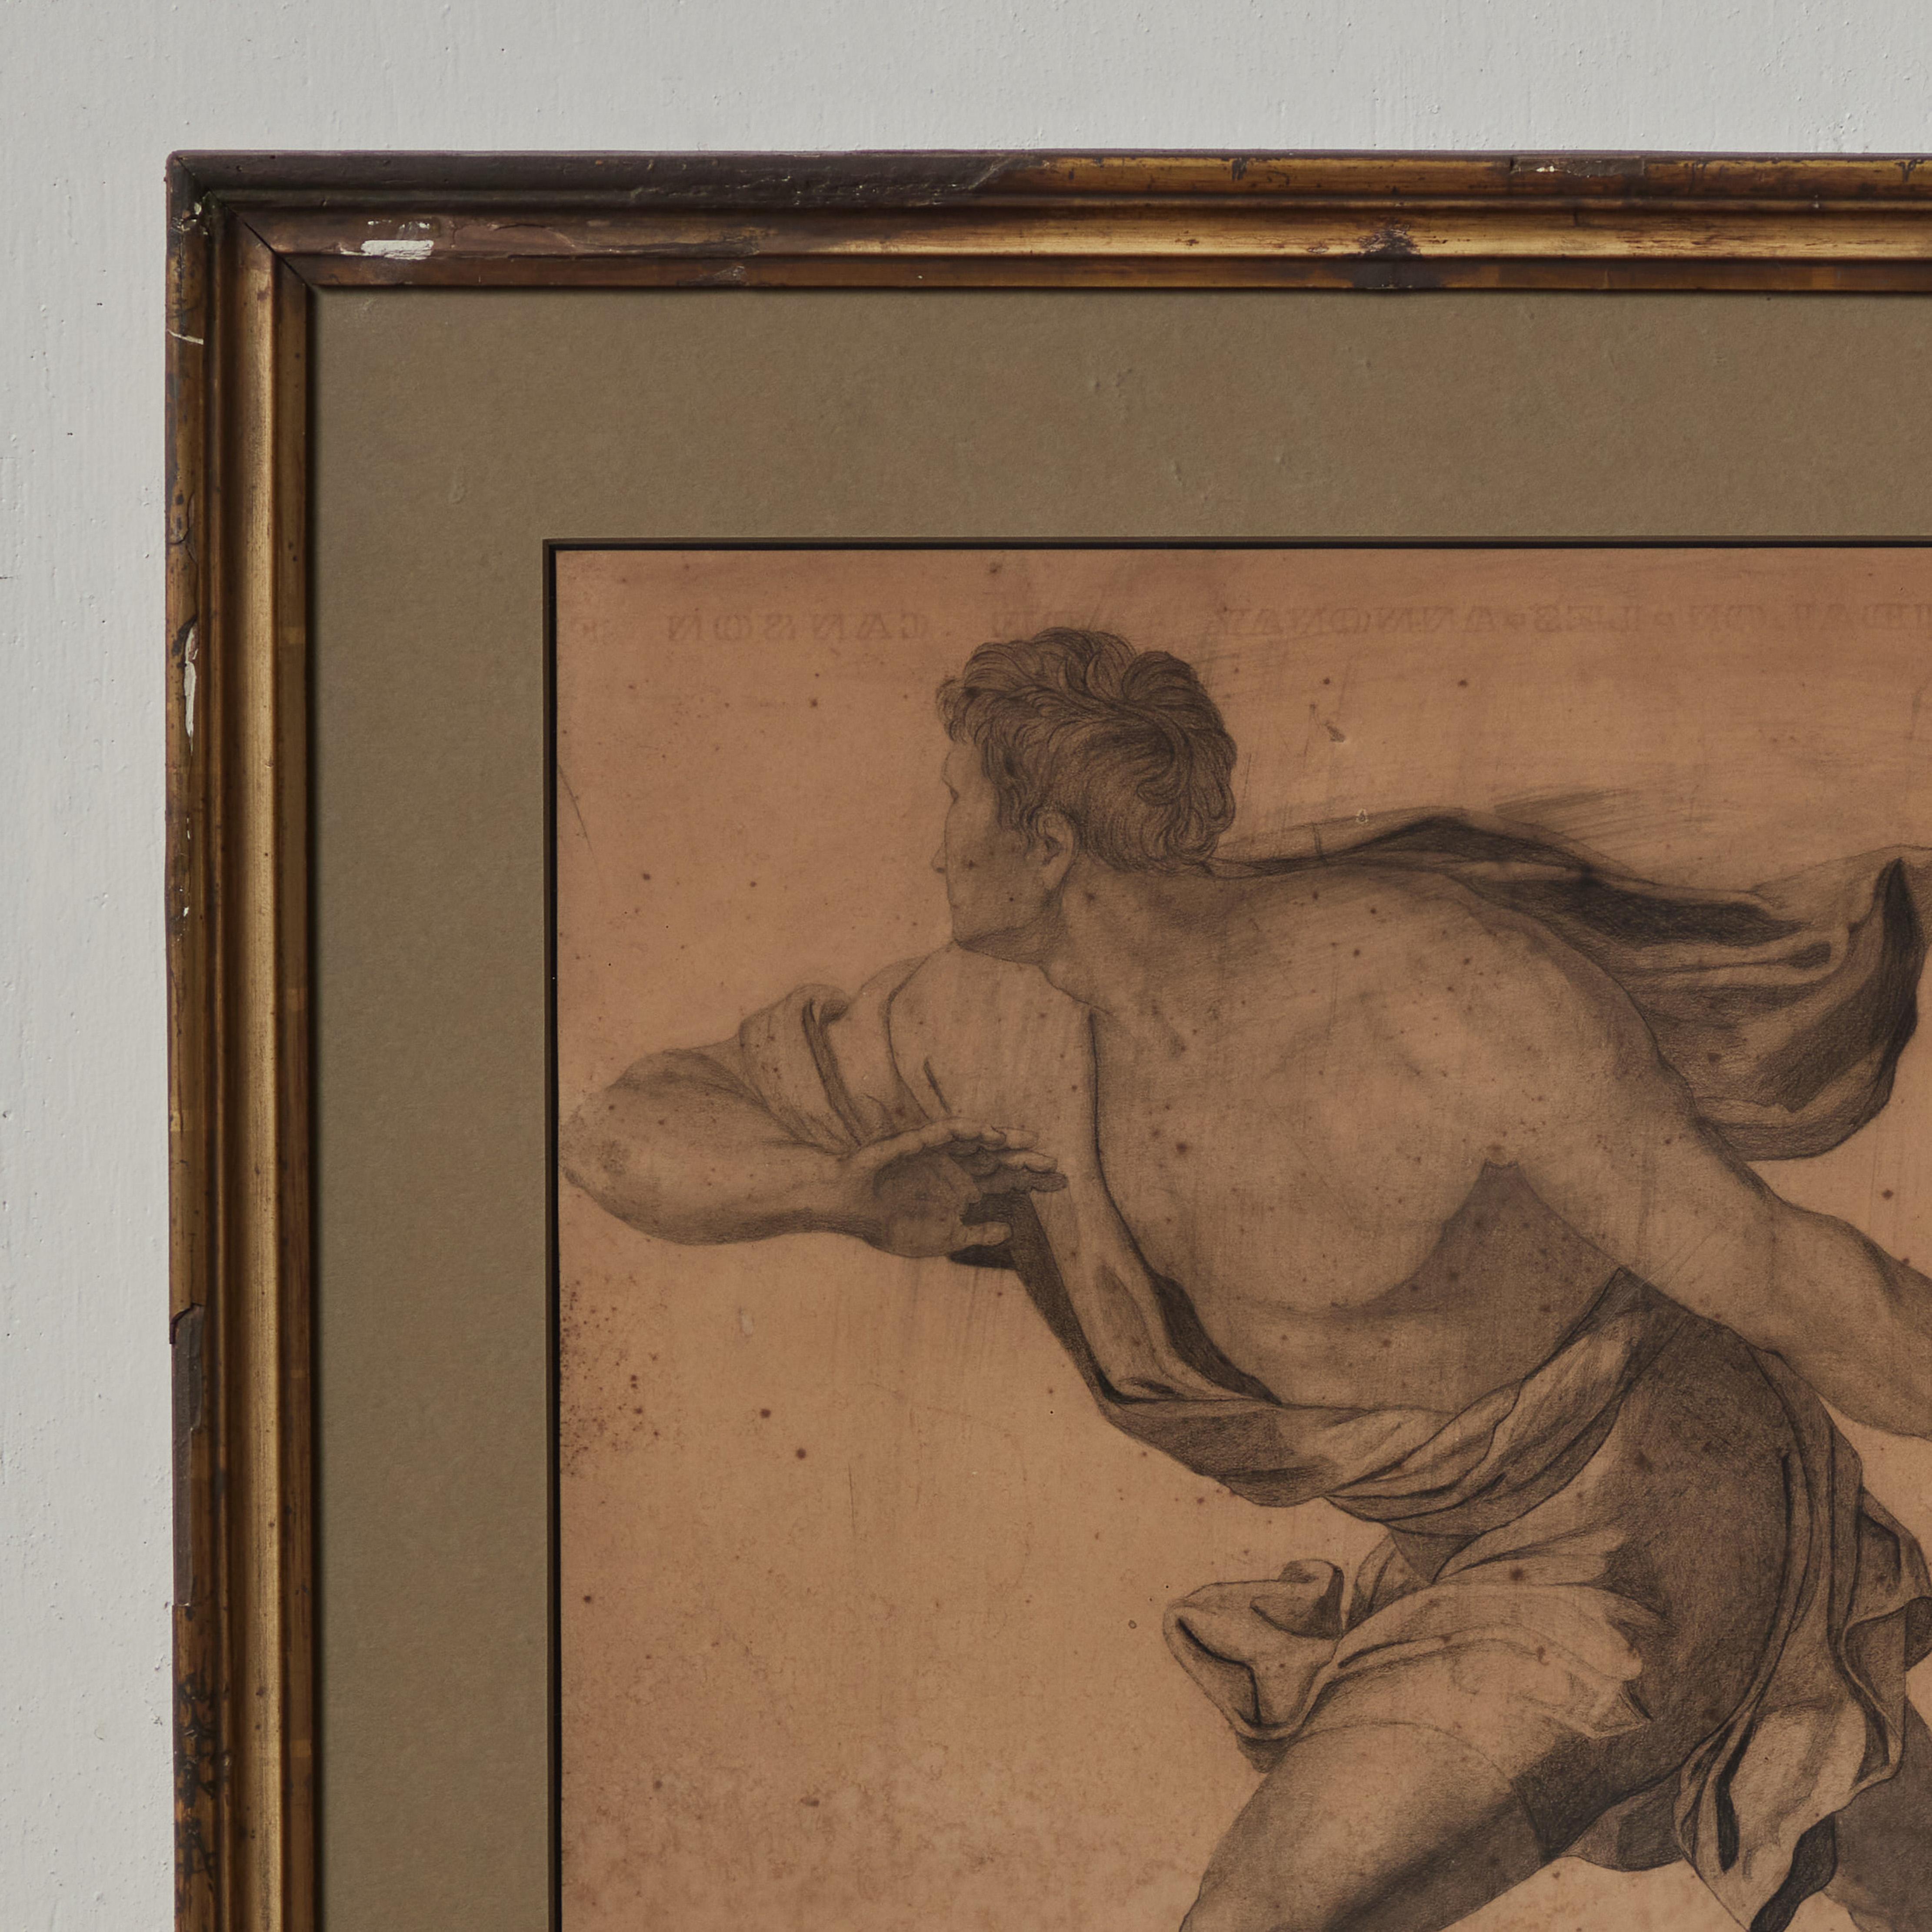 Pencil drawing of Roman gladiator by Alphonse Sebe, 1880-81. Mounted in a beveled gilt frame with dusky olive paper border and exceptional patina, the piece has an energetic spirit steeped in classical mythos. 

Italy, circa 1880

Dimensions: